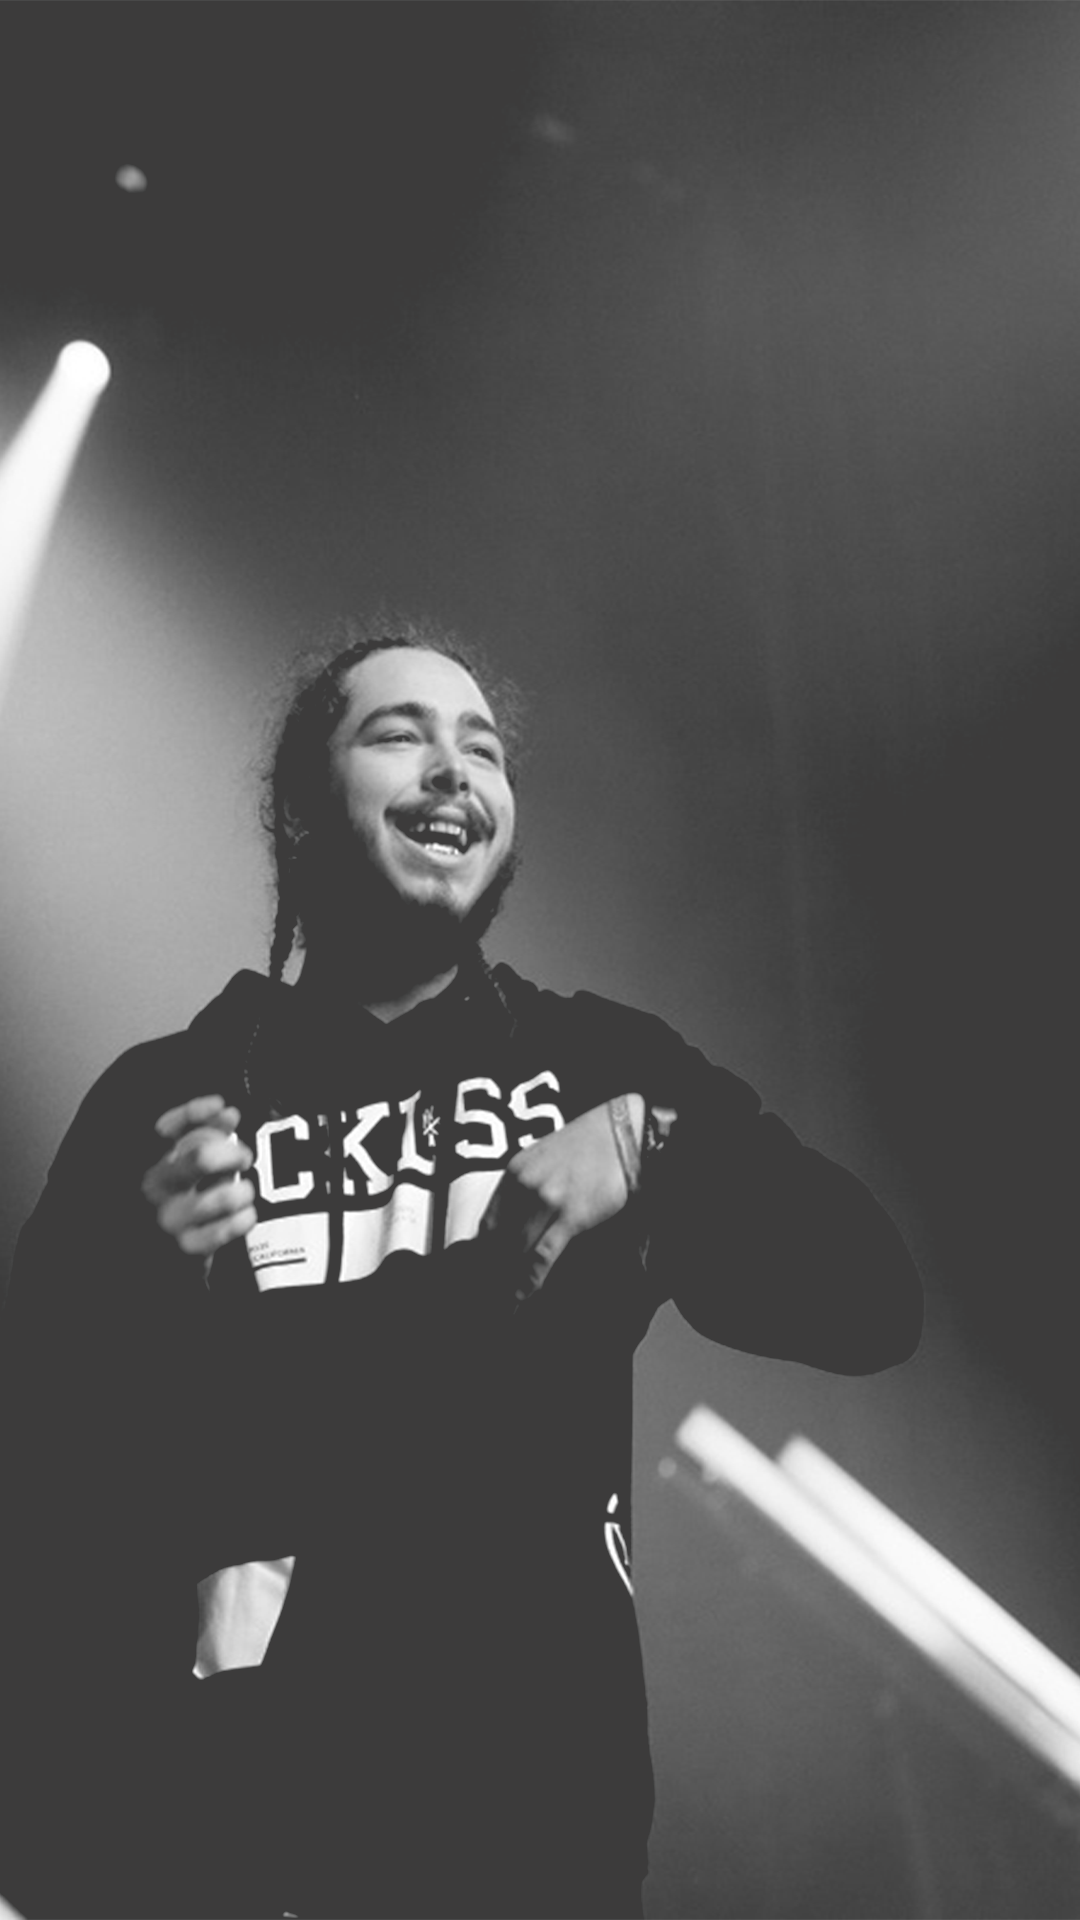 Post Malone Wallpapers - Wallpaper Cave